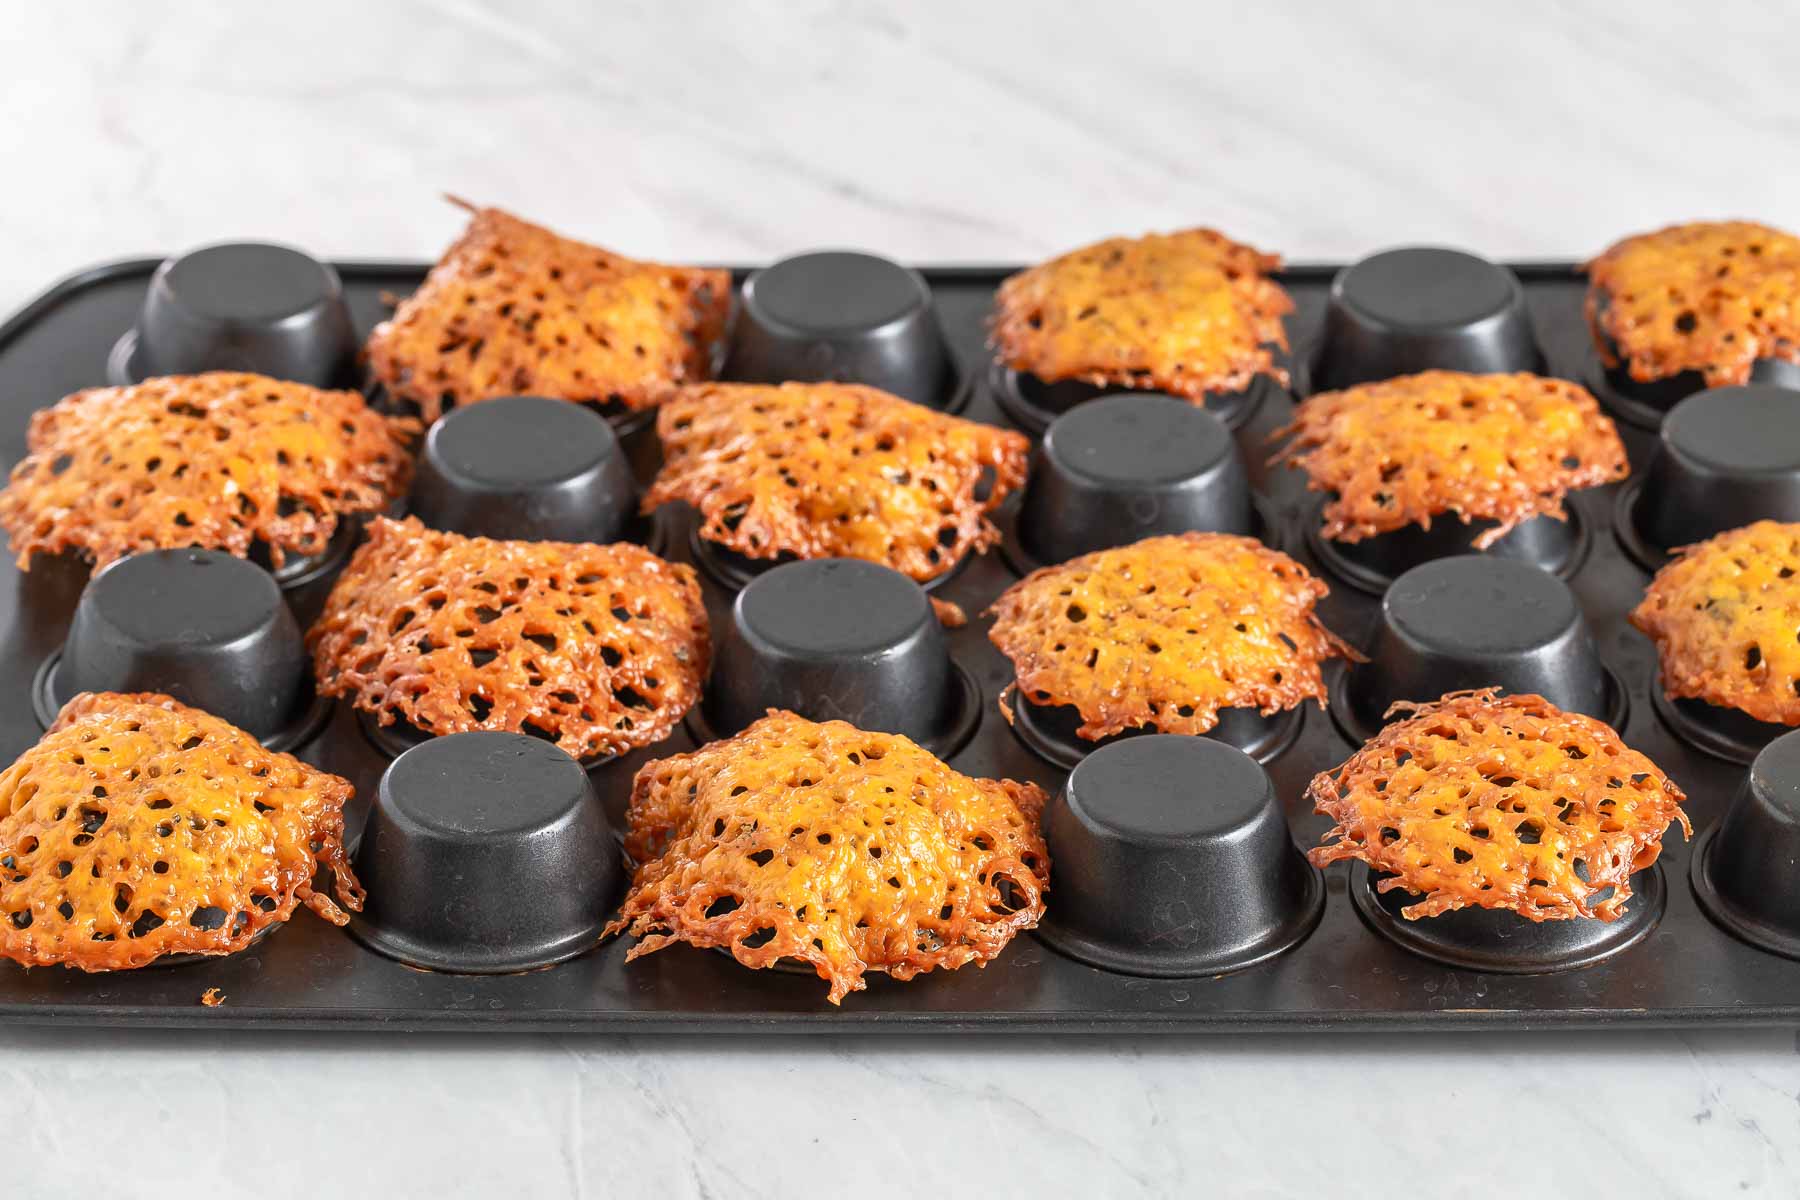 Cheddar cheese cups formed over mini muffin pan.